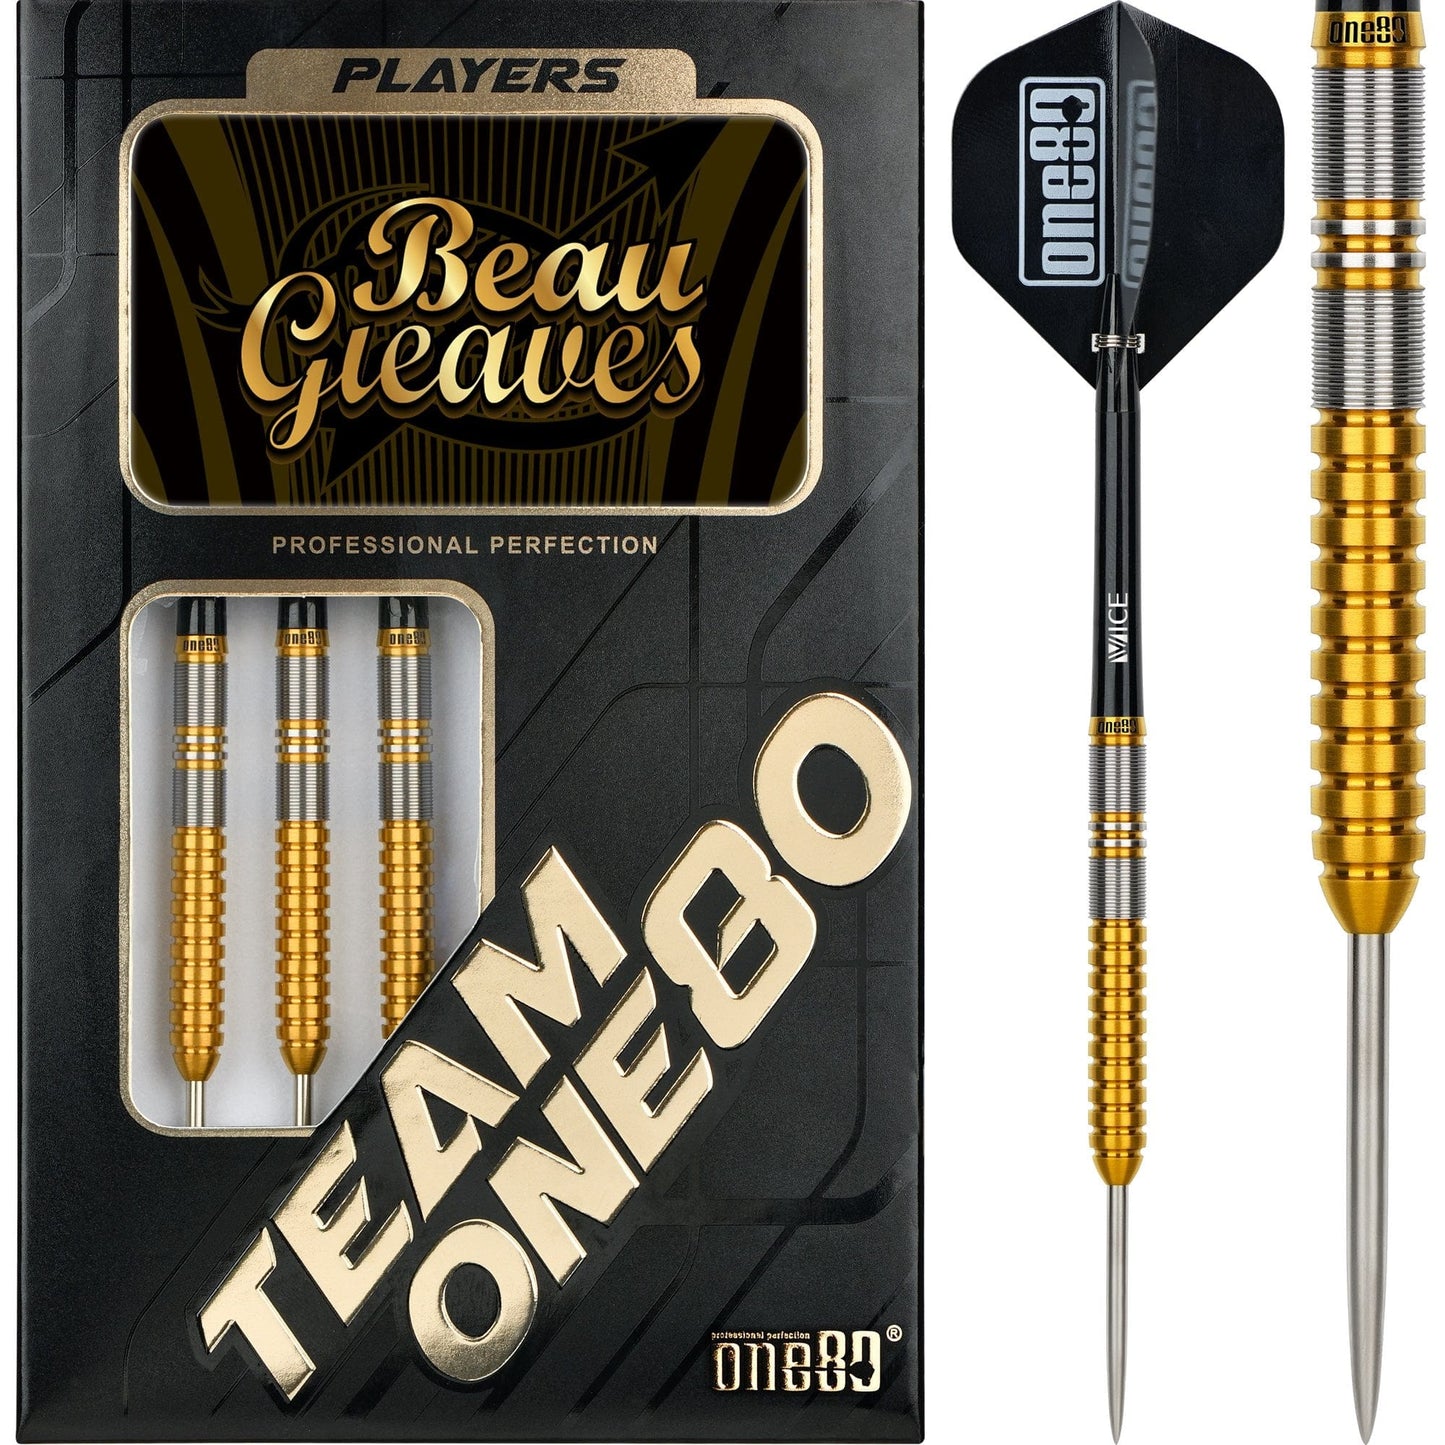 One80 Beau Greaves Darts - Steel Tip - Gold 21g